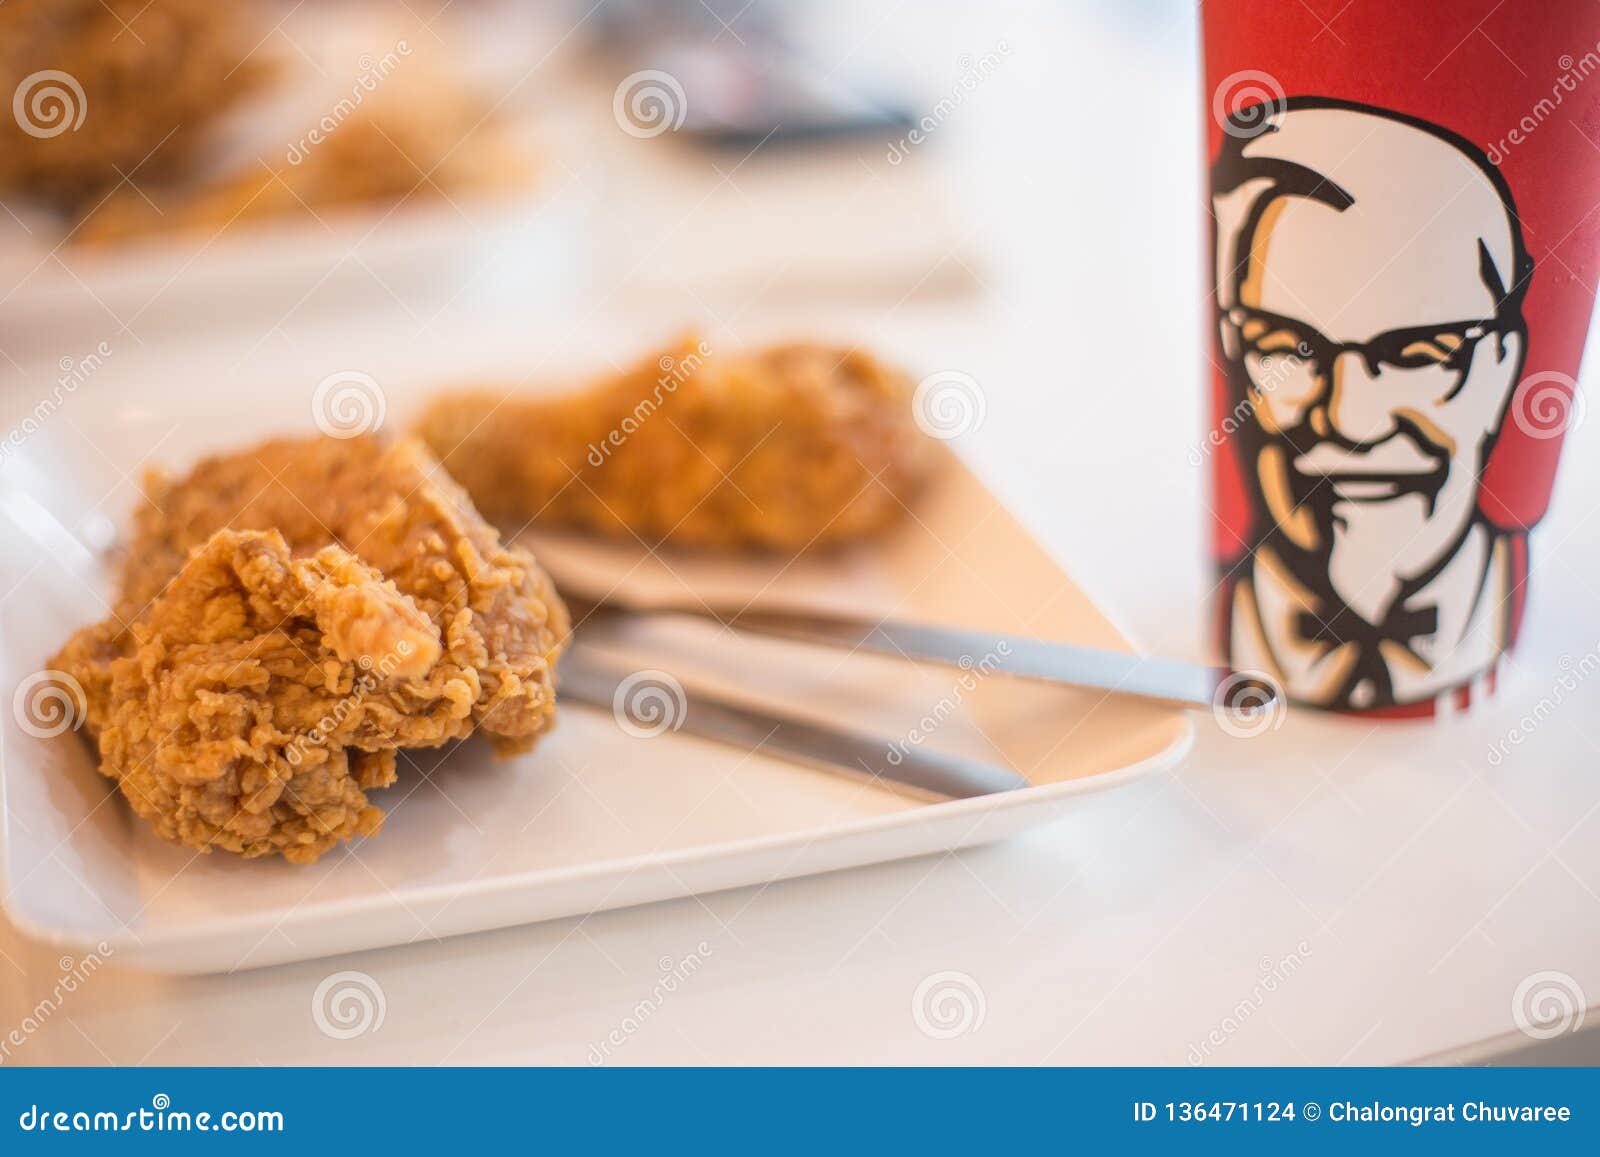 Kfc Fried Chicken On The Table Editorial Stock Image Image Of